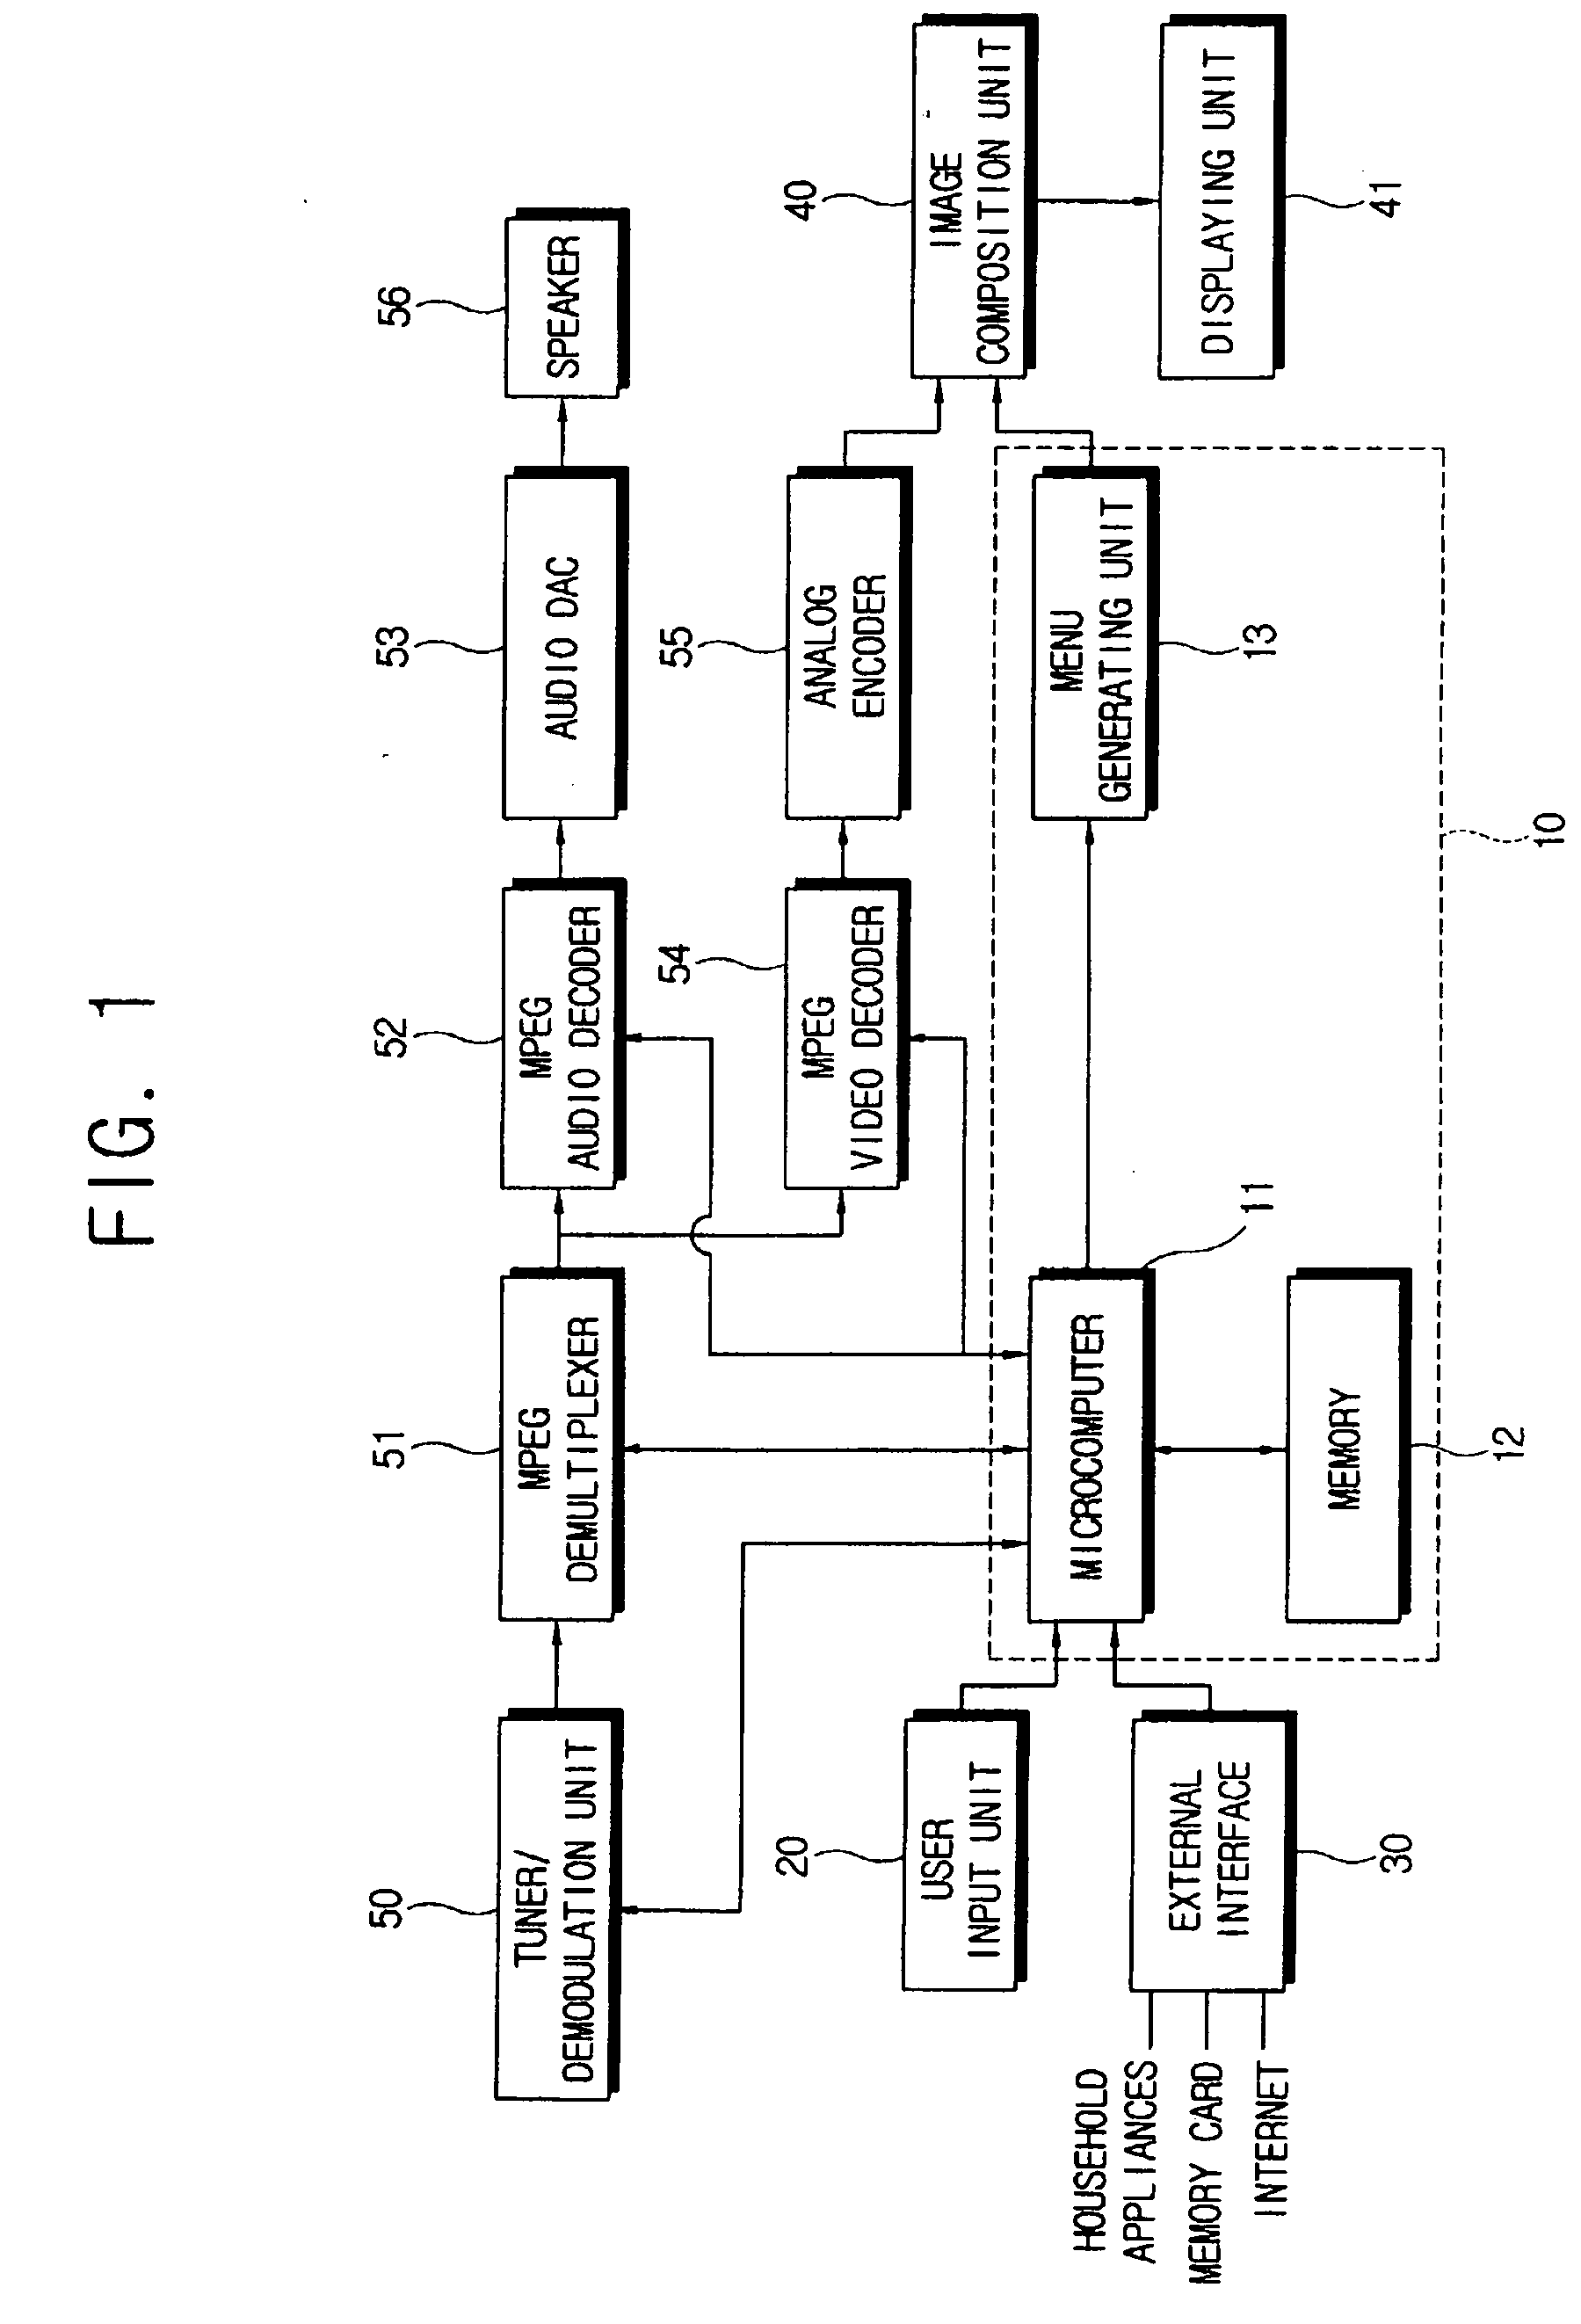 Digital TV and control method thereof